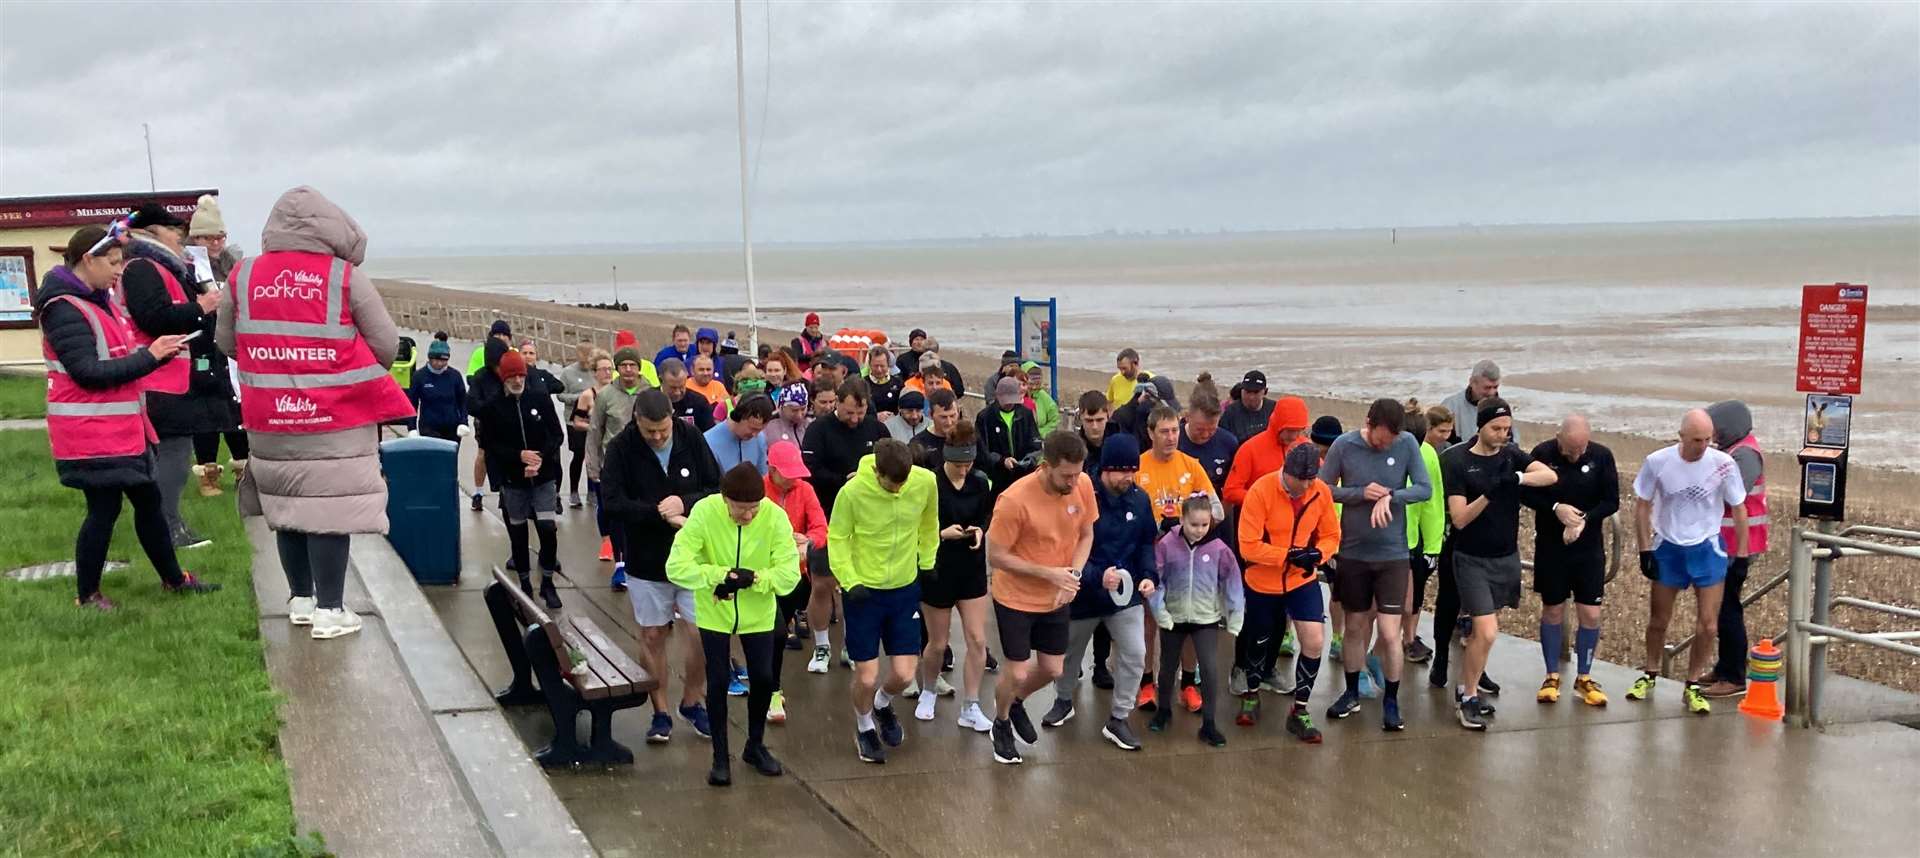 They're off! Seventy-one runners celebrated the 100th anniversary of Sheppey's 5k parkrun on The Leas at Minster on Saturday. Picture: John Nurden